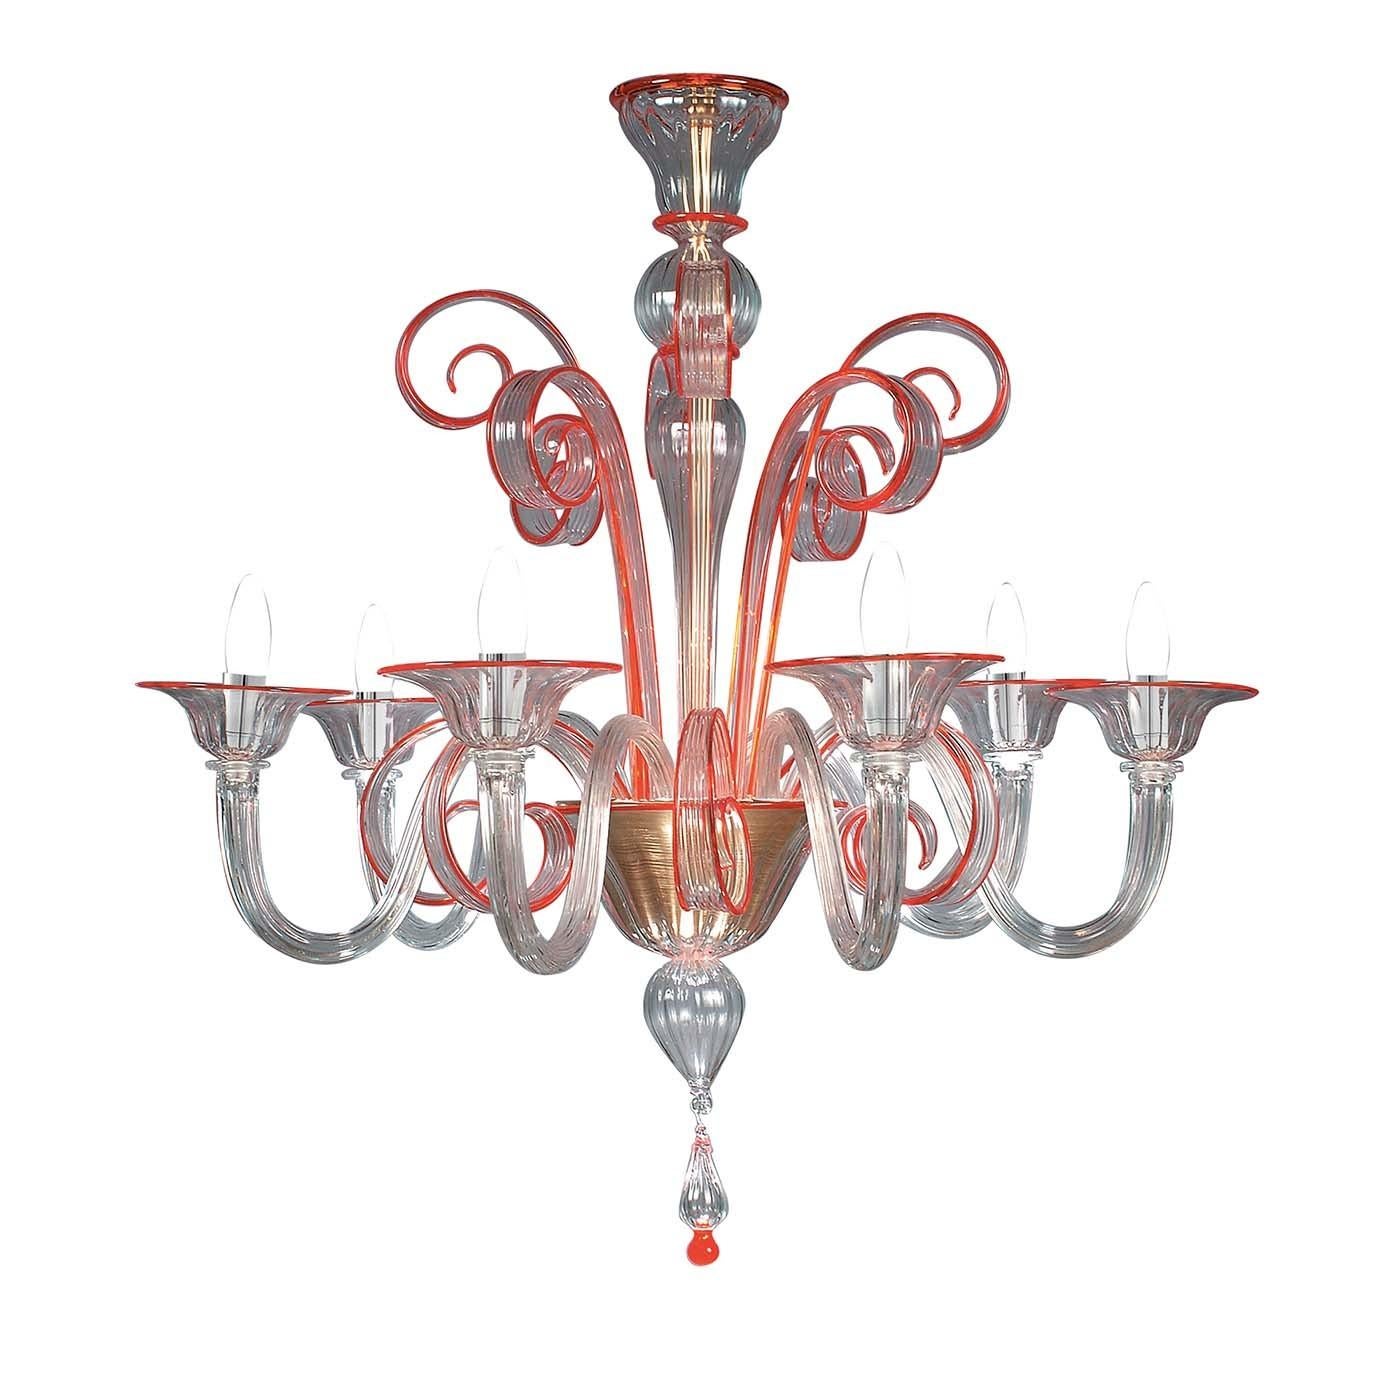 This elegant chandelier features a crystal central structure with amber details and pendants. Entirely hand-blown and made with Murano glass, this Venetian masterpiece enhances the appearance of any environment. This exquisite piece reinterprets the